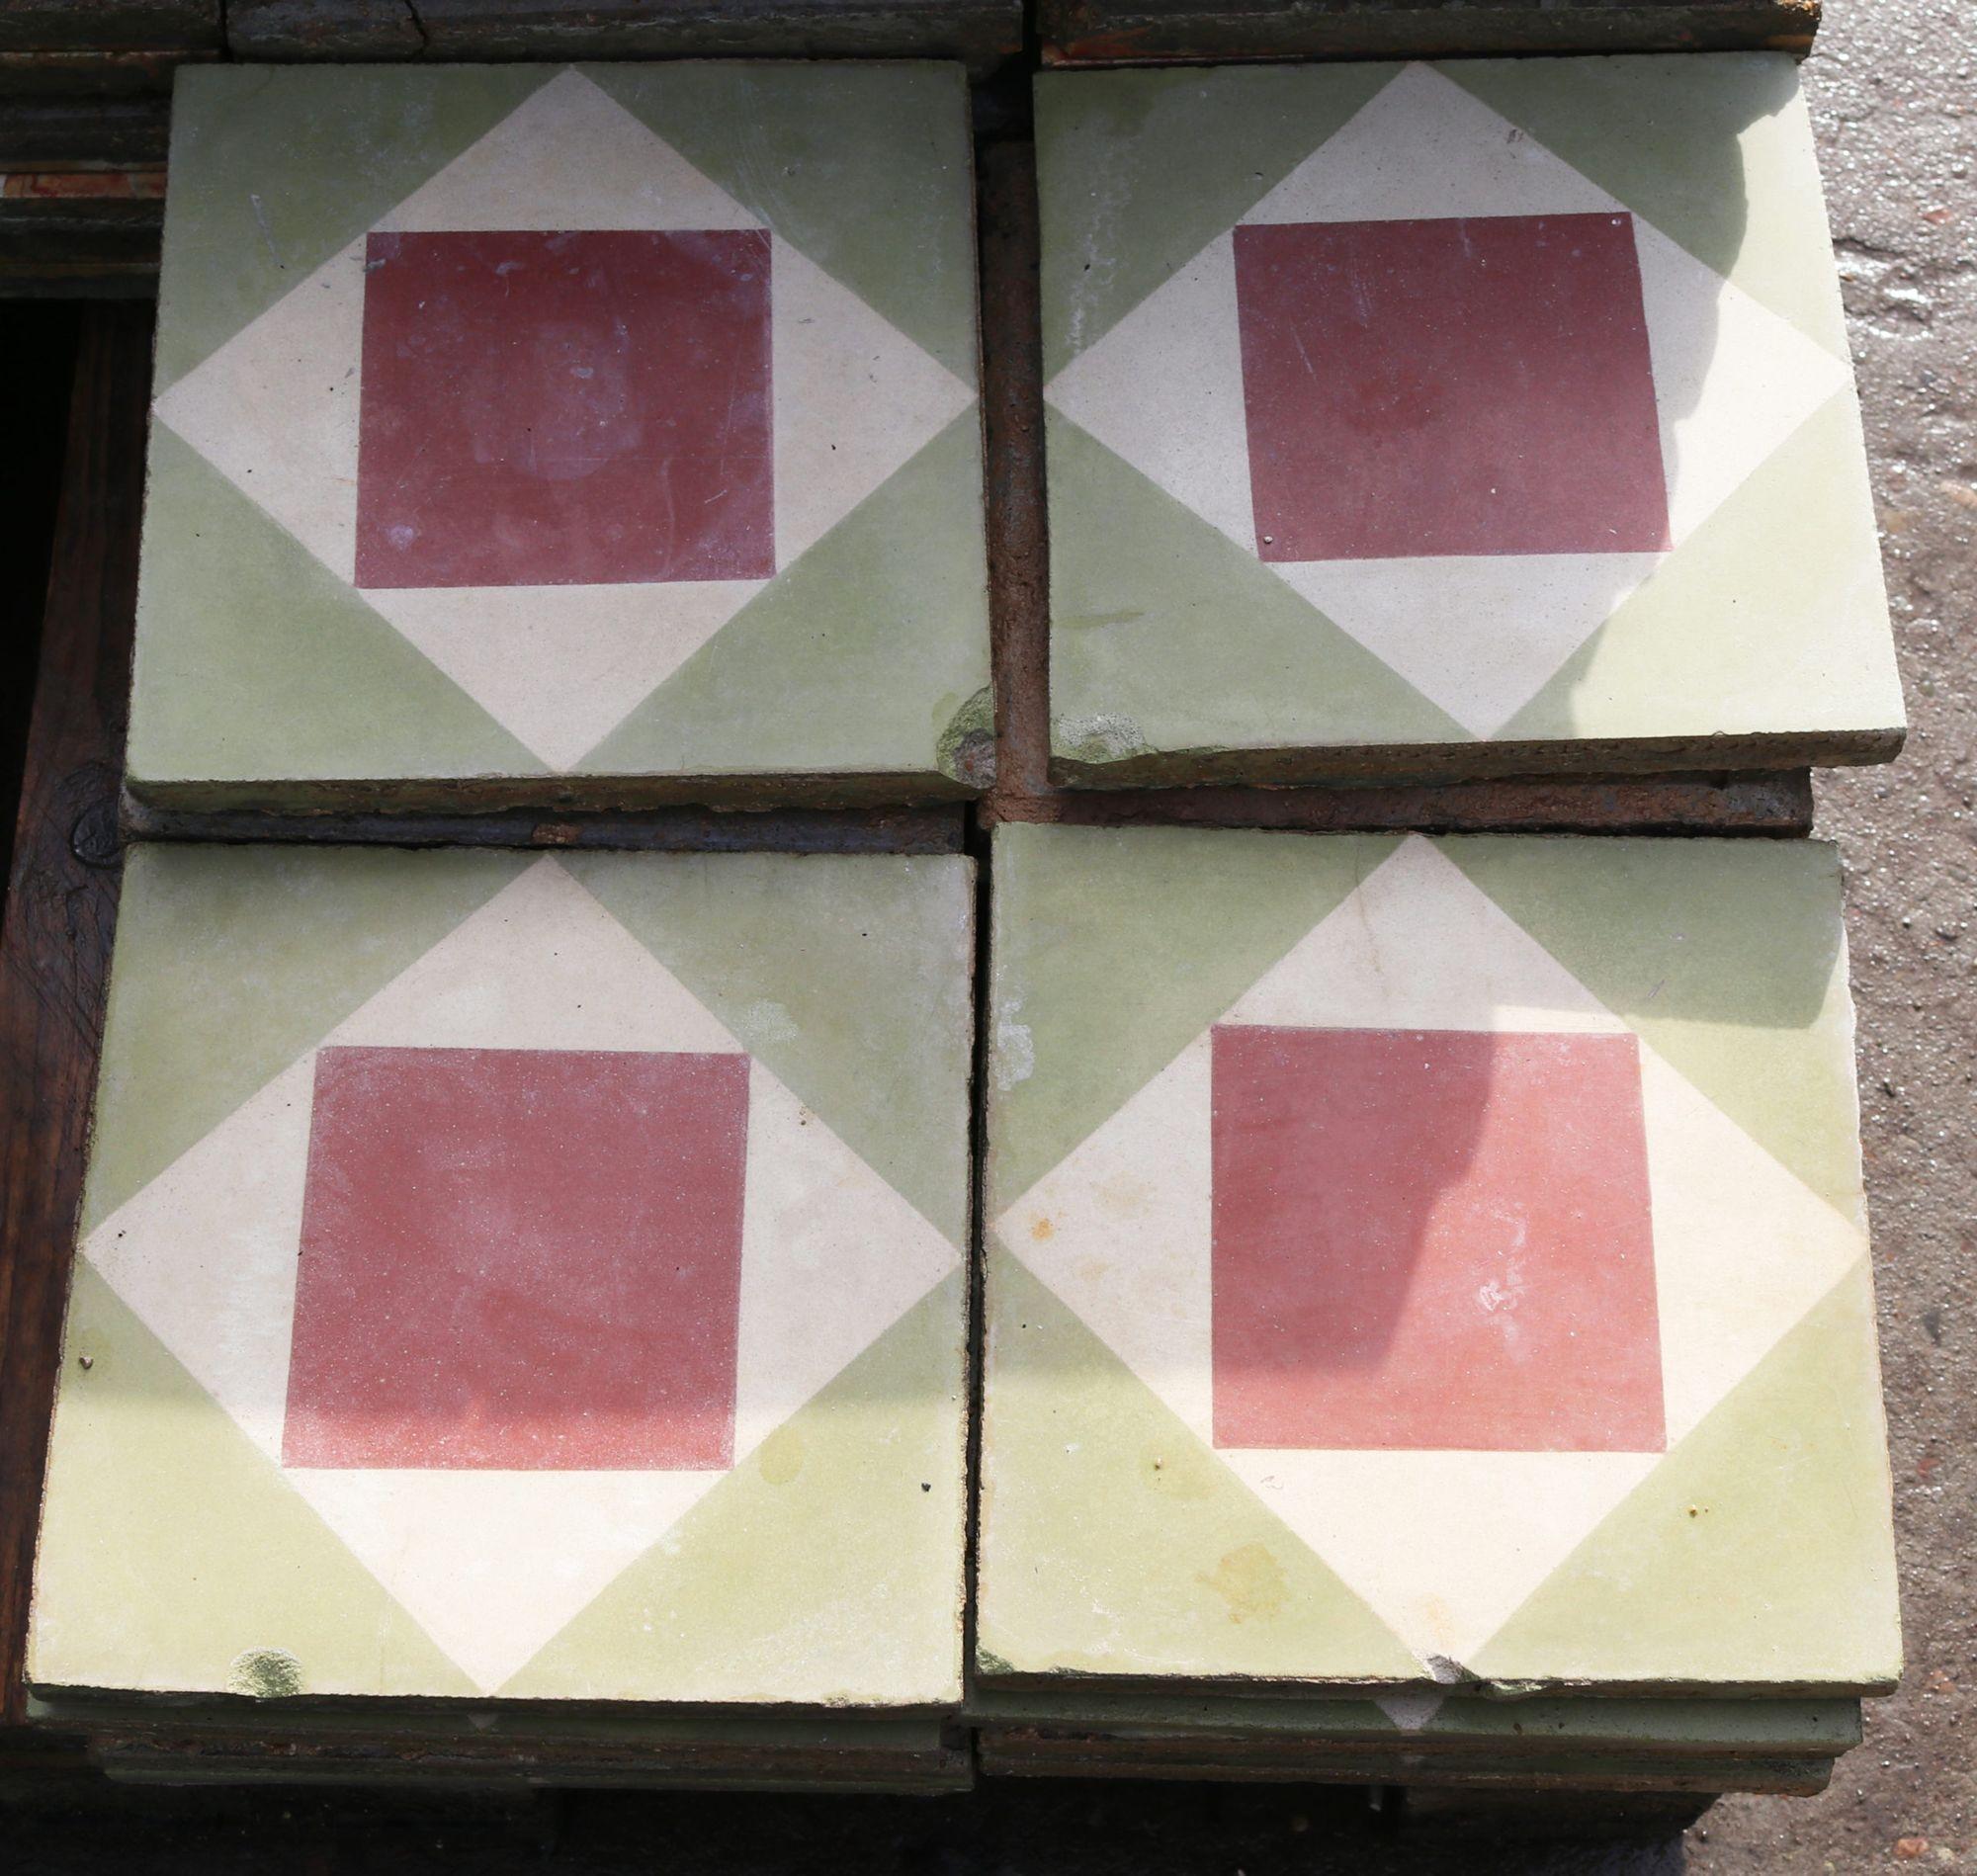 A small batch of 22 reclaimed encaustic cement floor tiles. These tiles will cover 0.88 m2 or 9.4 sq. ft. They are suitable for use on floors or walls.